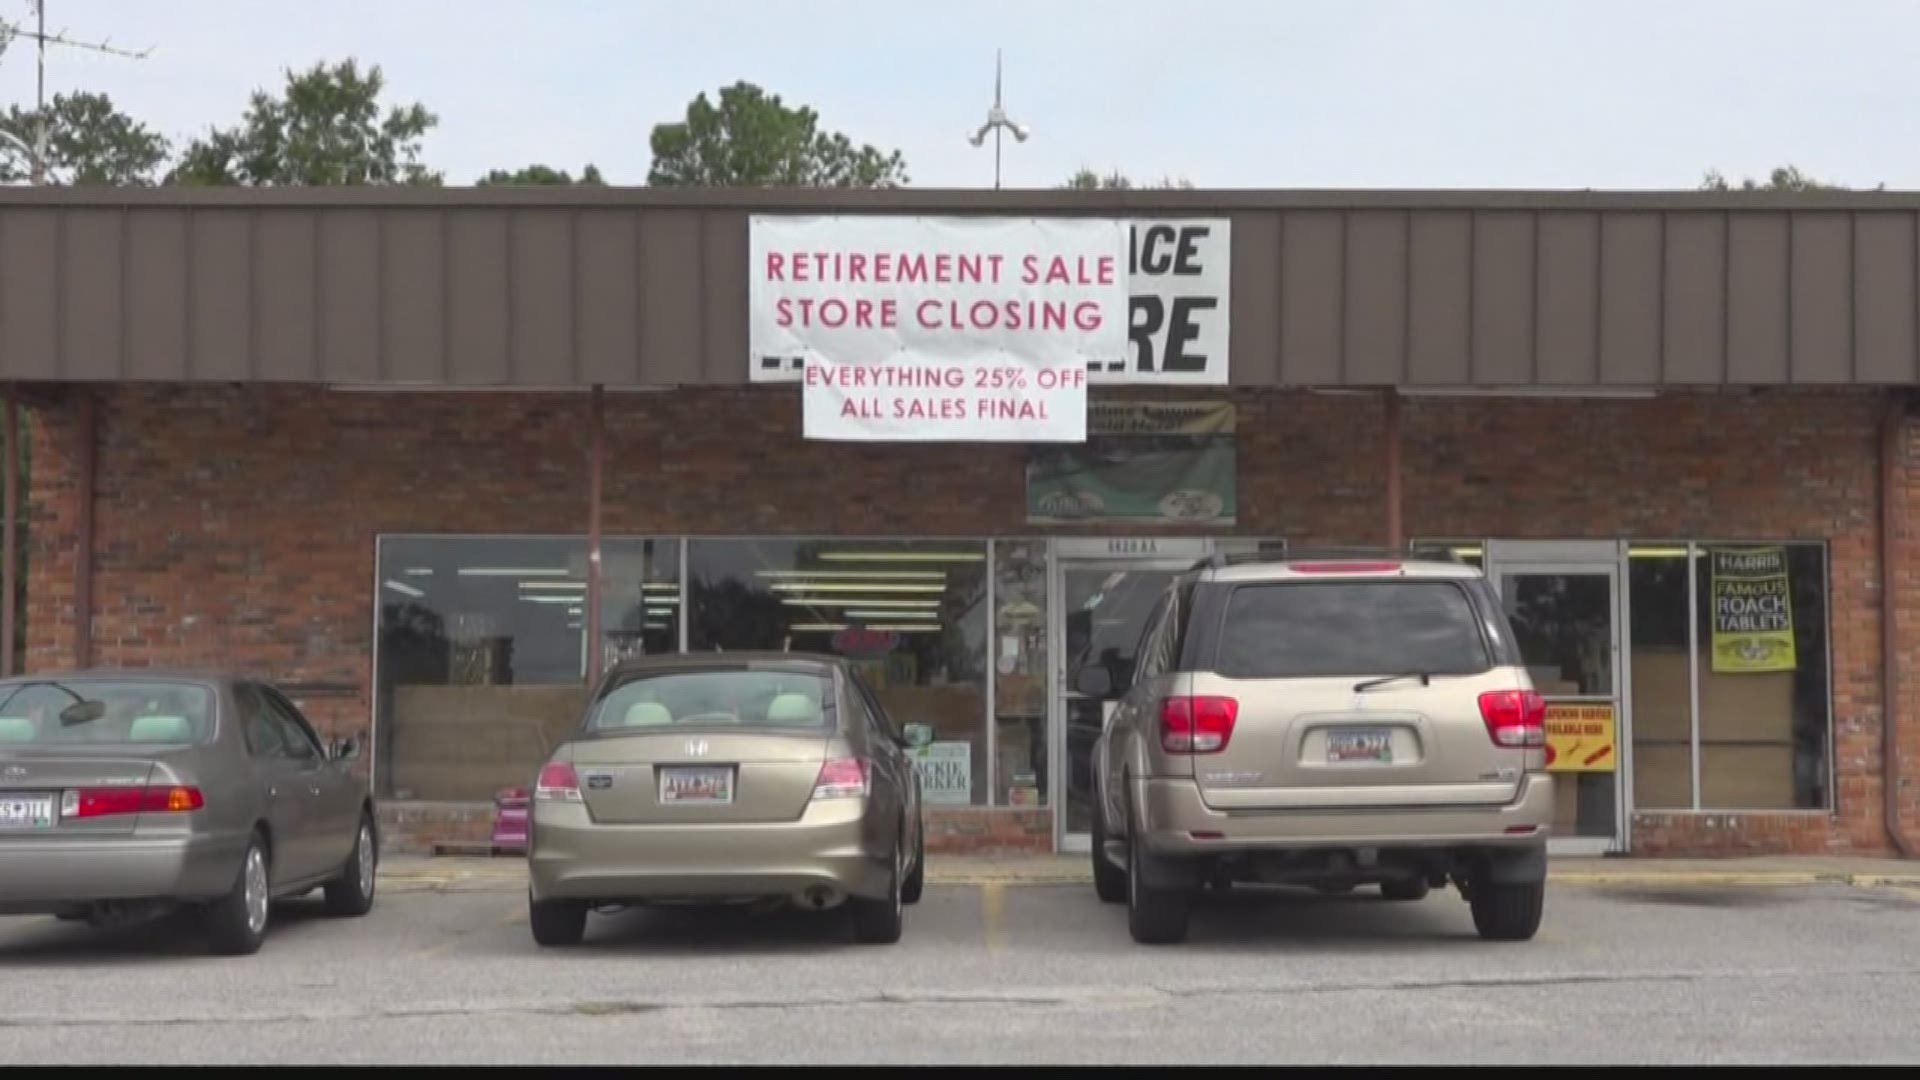 The Cedar Terrace Hardware Store is shutting down after decades of service to the community.